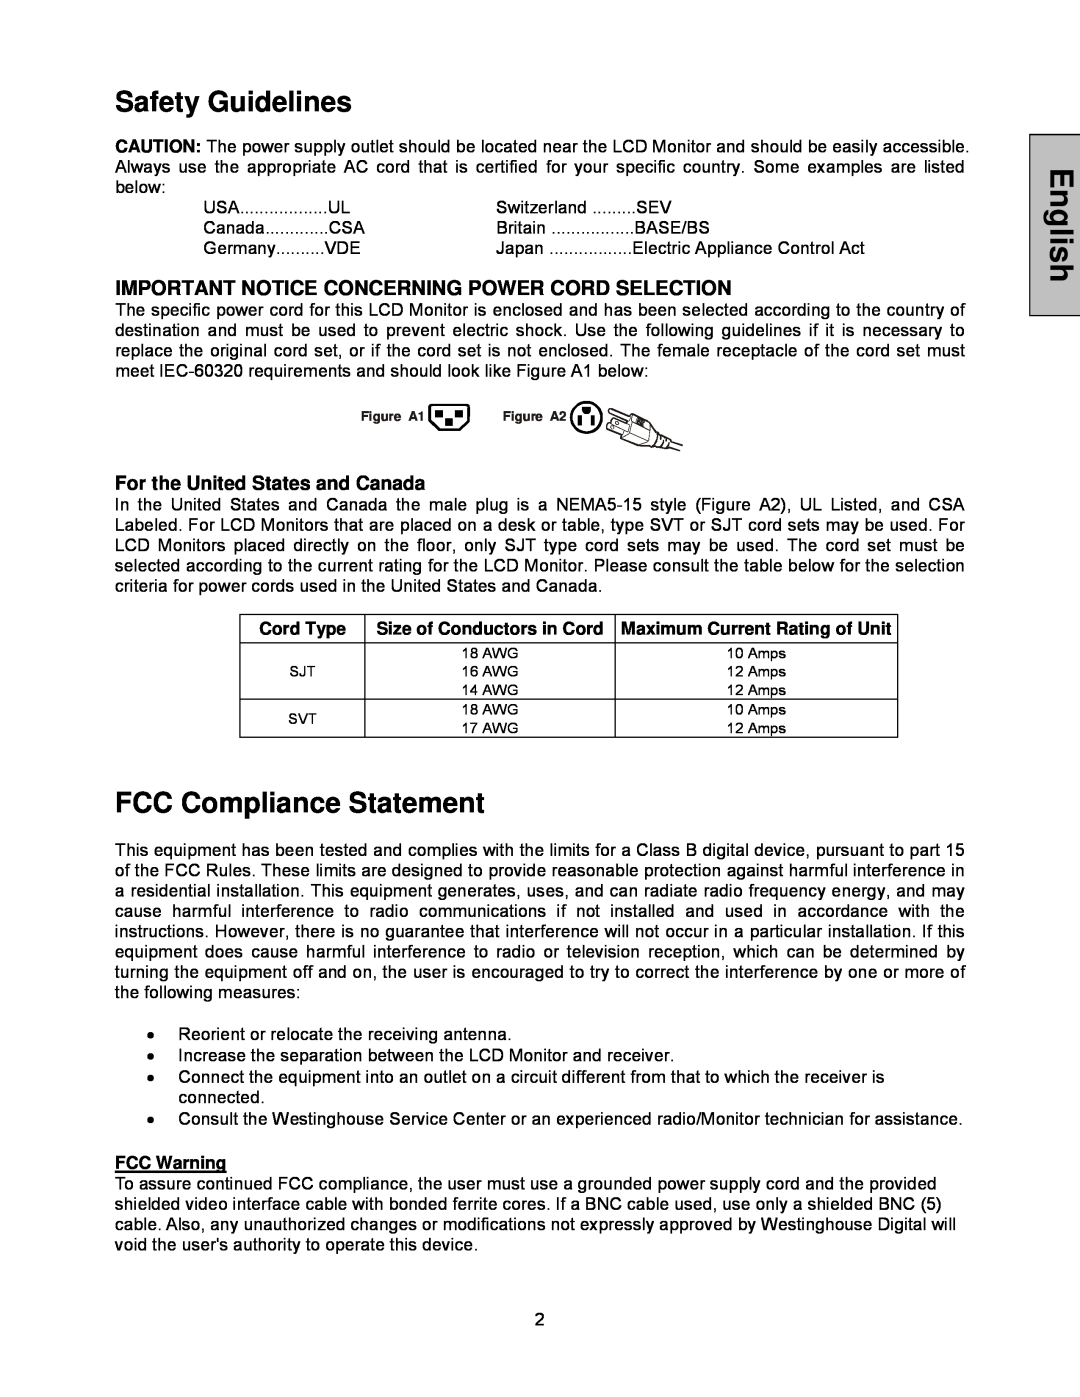 Westinghouse LCM - 19v5 manual Safety Guidelines, FCC Compliance Statement, English, For the United States and Canada 